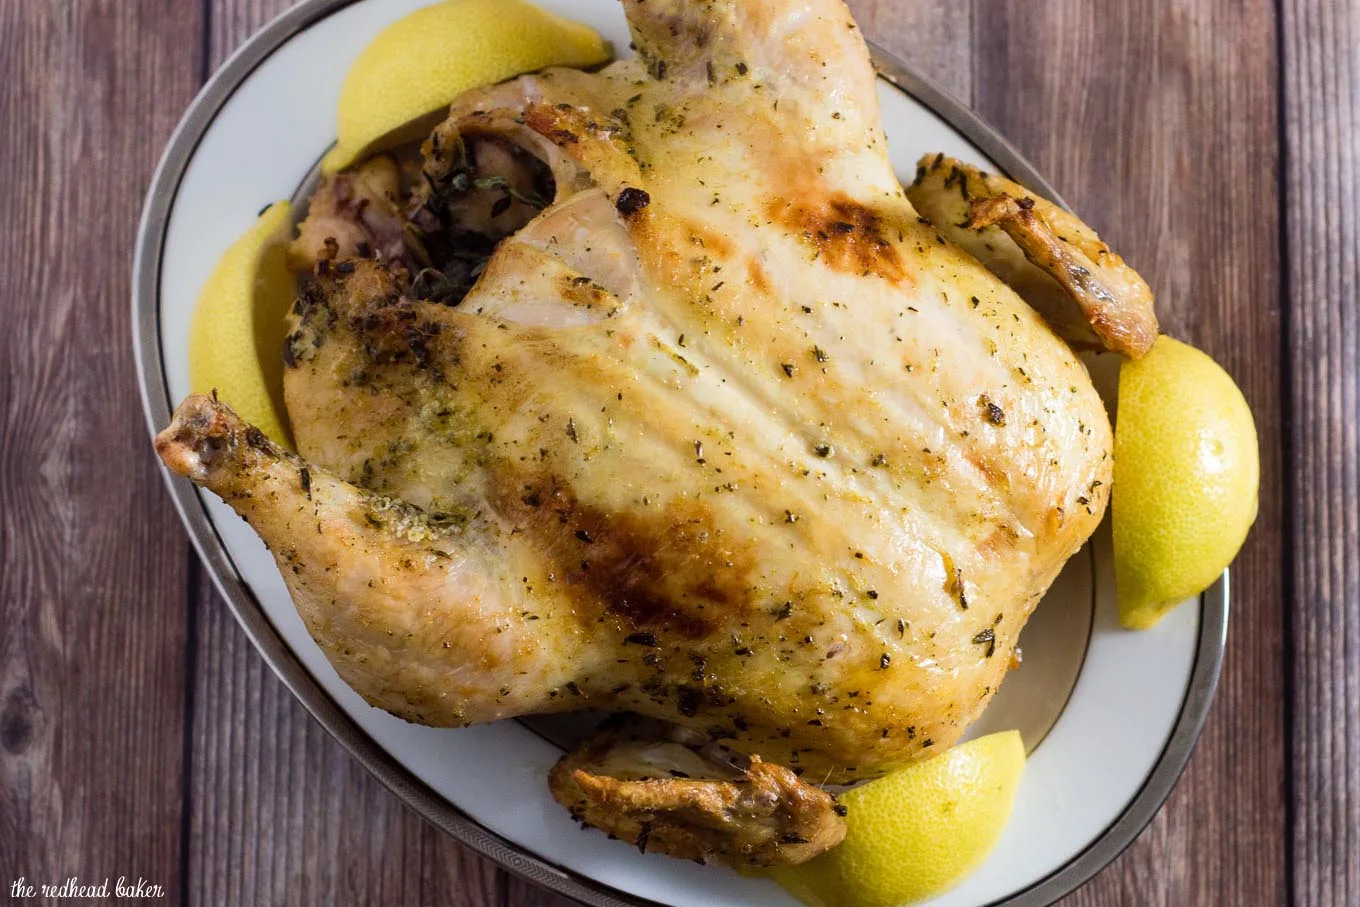 Herb-and-Citrus Dry-Brined Turkey imparts all of the flavor of a traditional wet brine without the hassle and refrigerator space. So little effort for so much reward!